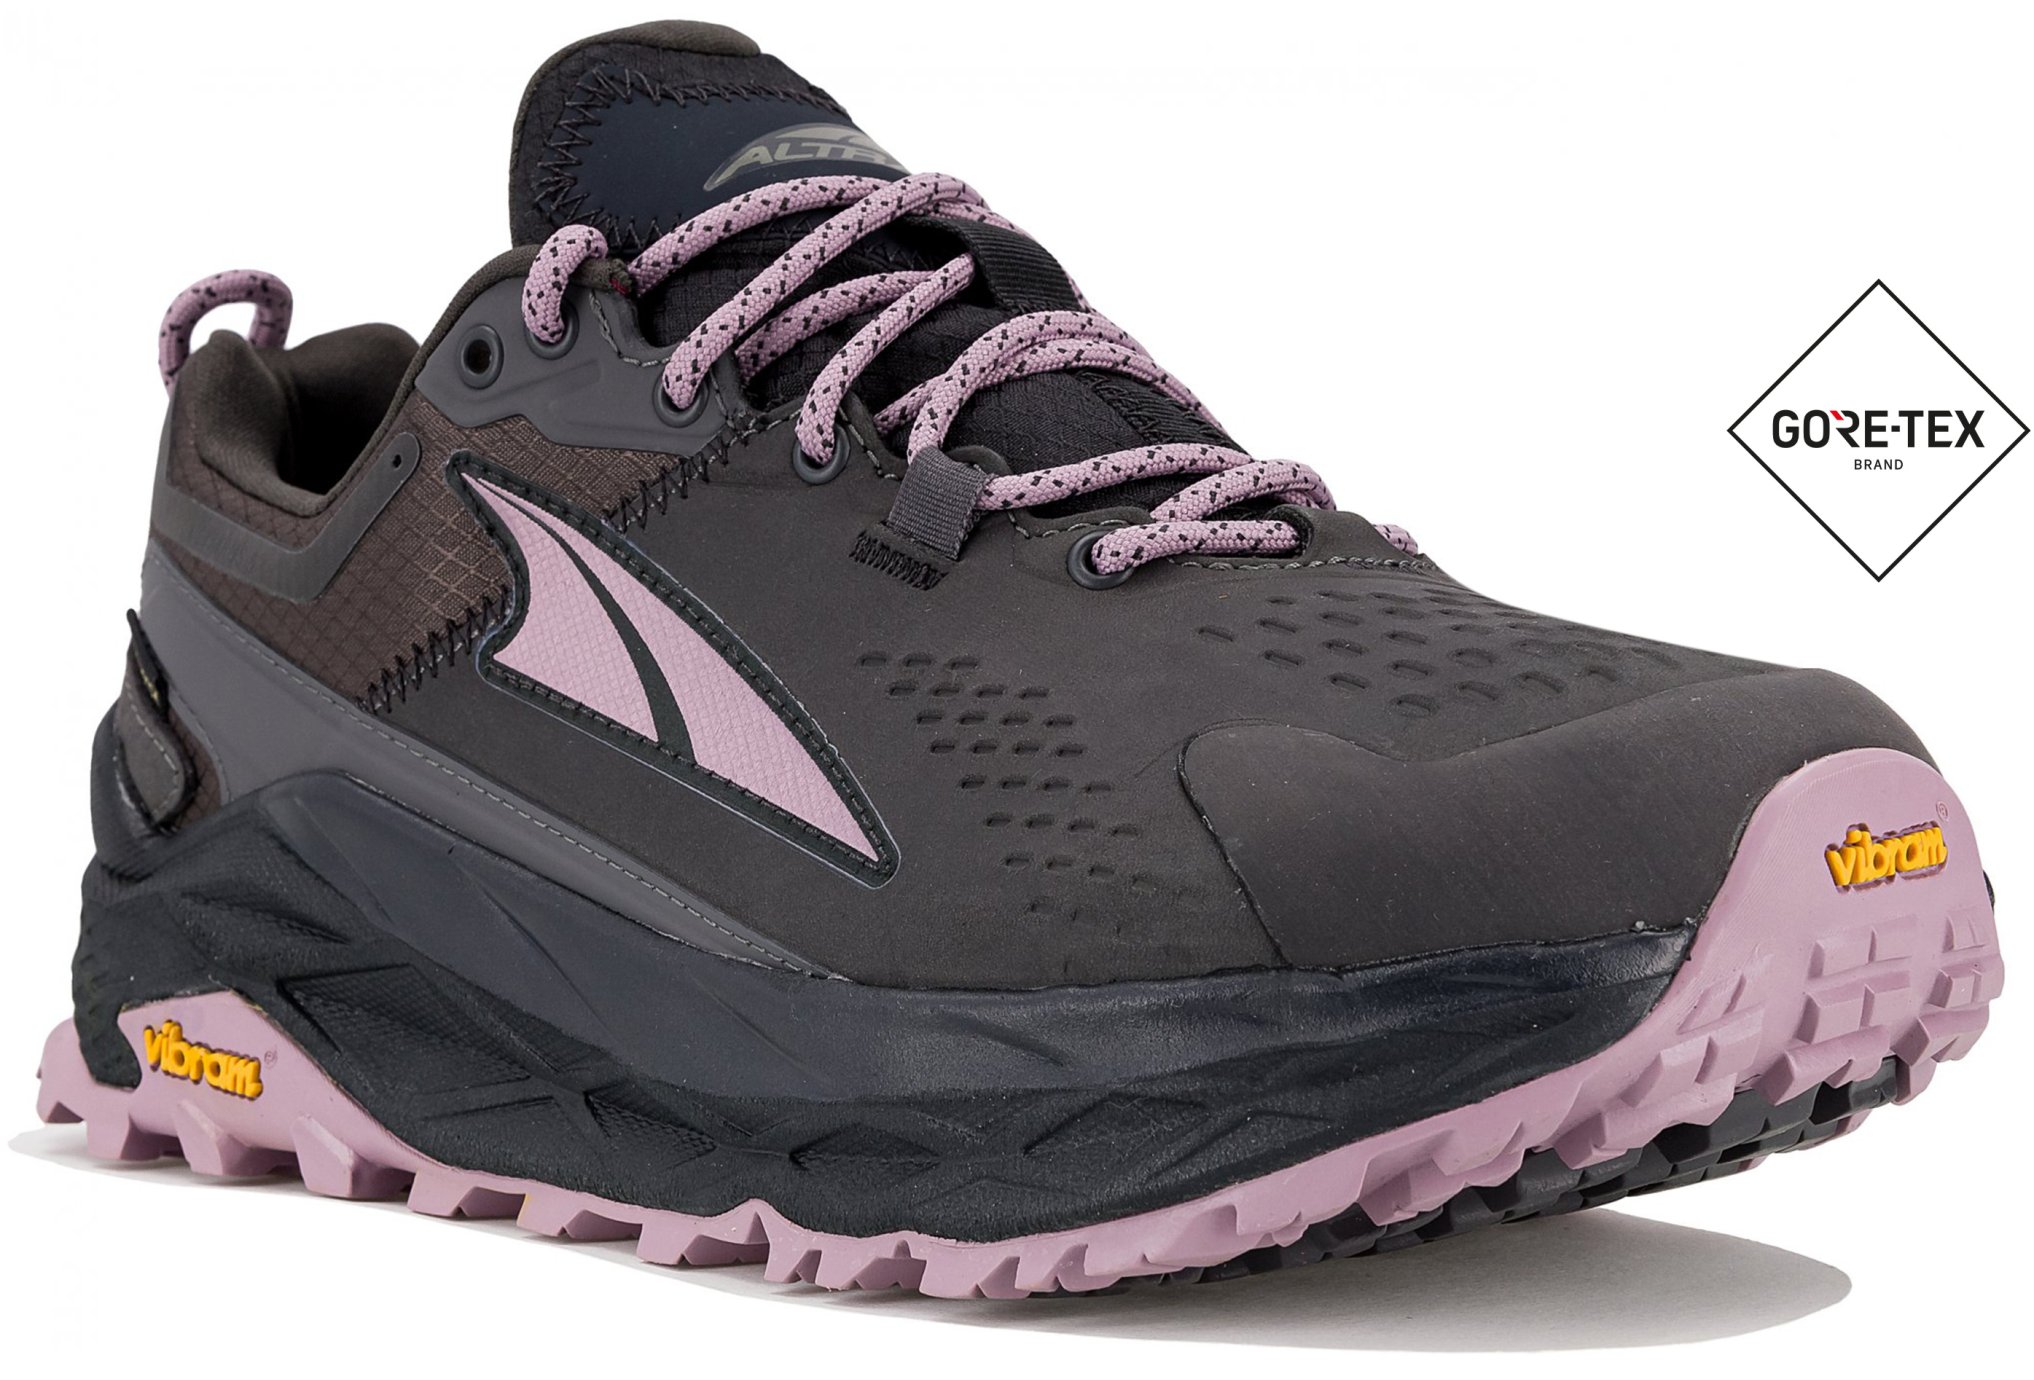 Altra Olympus 5 Hike Low Gore-Tex W Chaussures de sport femme